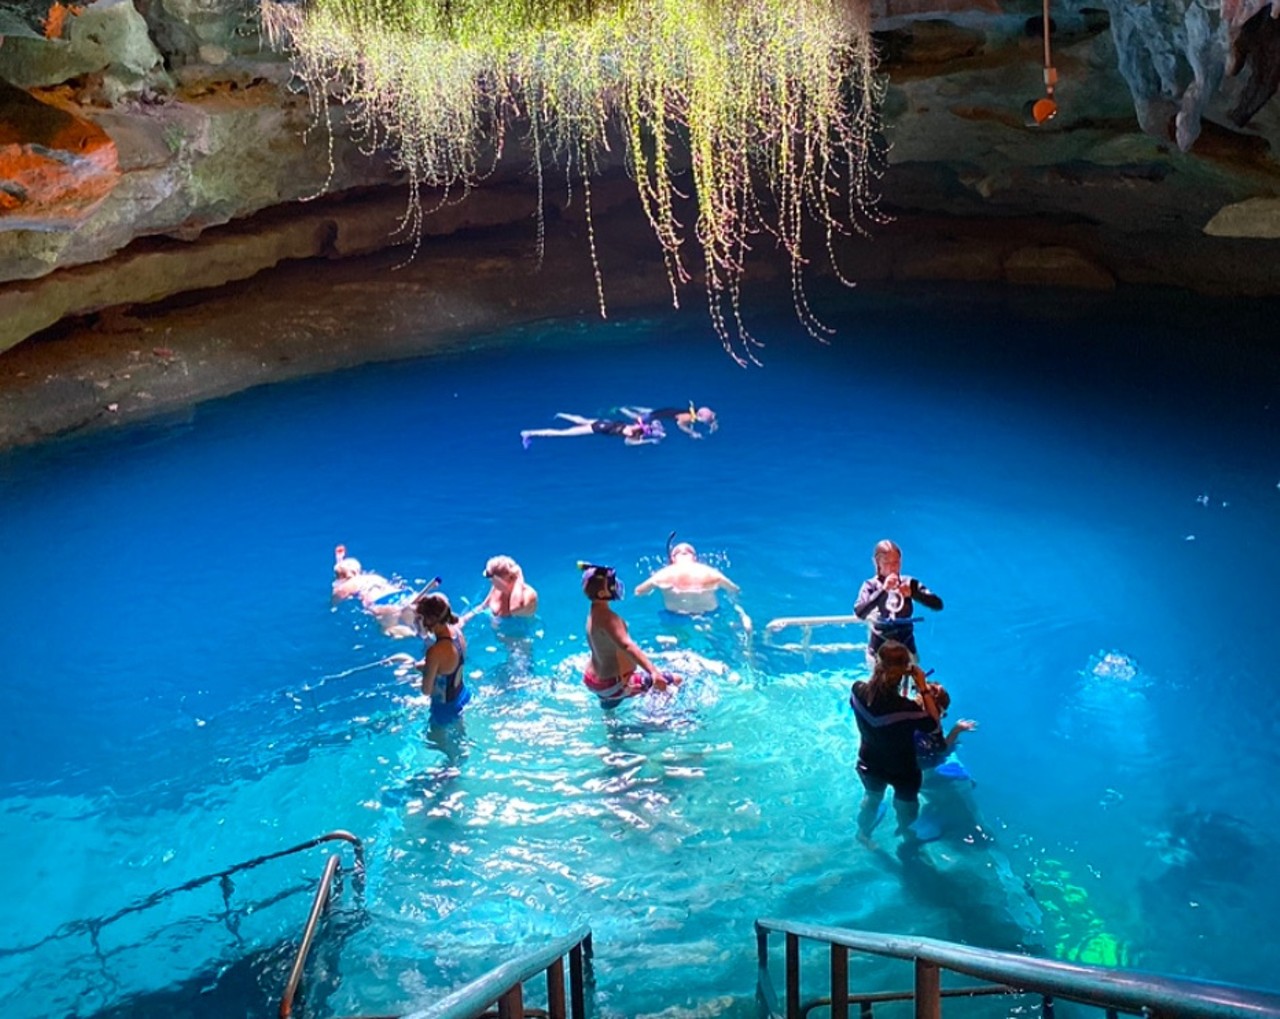 Devil’s Den
2 hours from Orlando
This Instagram-worthy North Central Florida spring gets its name from the steam that was seen radiating from the cave when it was first discovered. Now you can swim, scuba dive or snorkel in this prehistoric water.